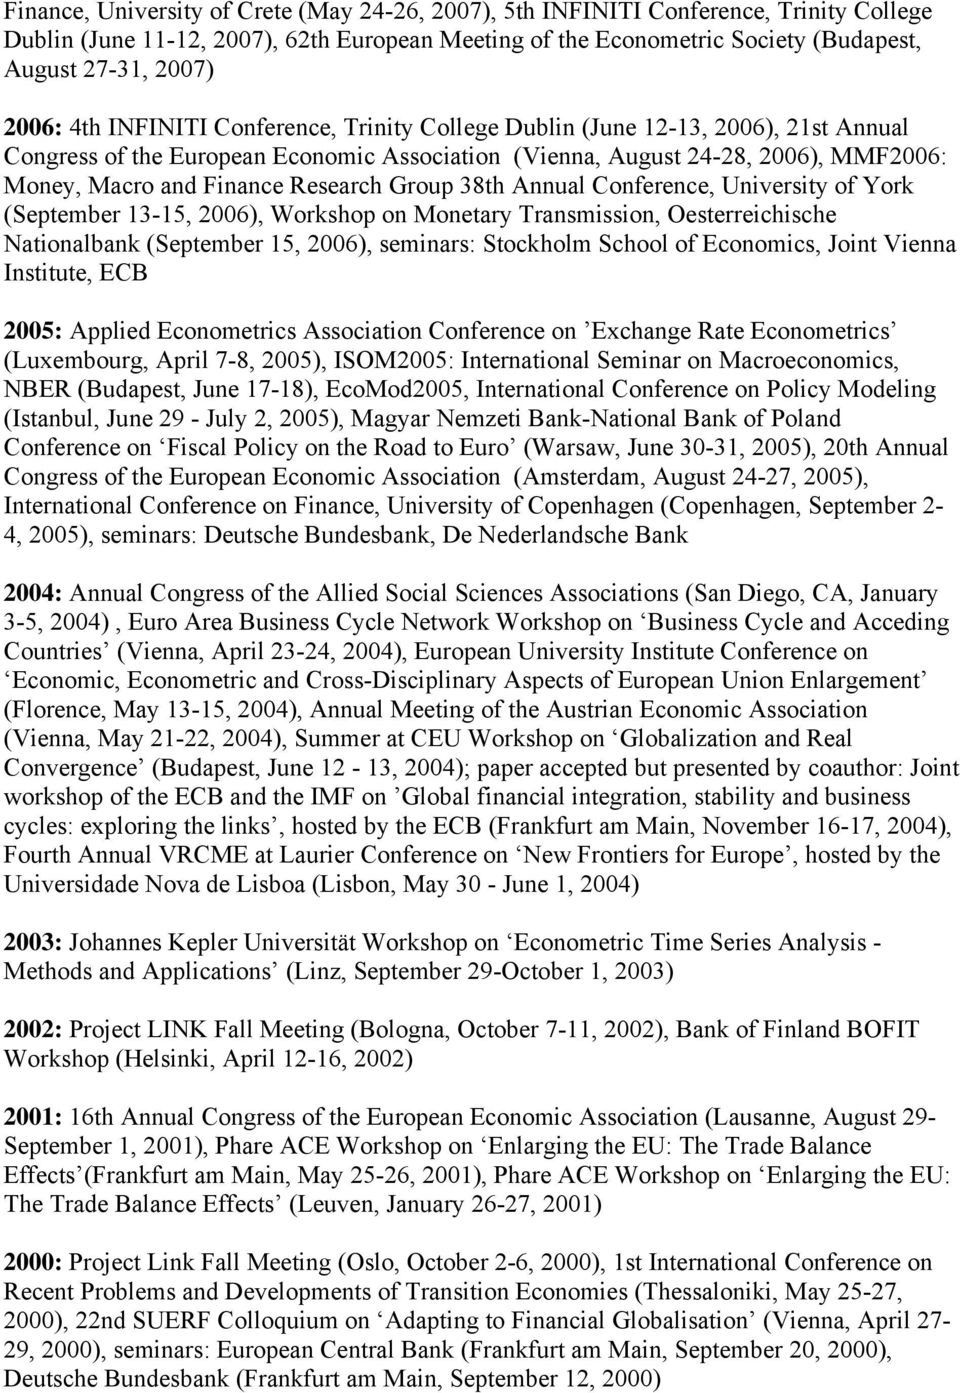 Research Group 38th Annual Conference, University of York (September 13-15, 2006), Workshop on Monetary Transmission, Oesterreichische Nationalbank (September 15, 2006), seminars: Stockholm School of